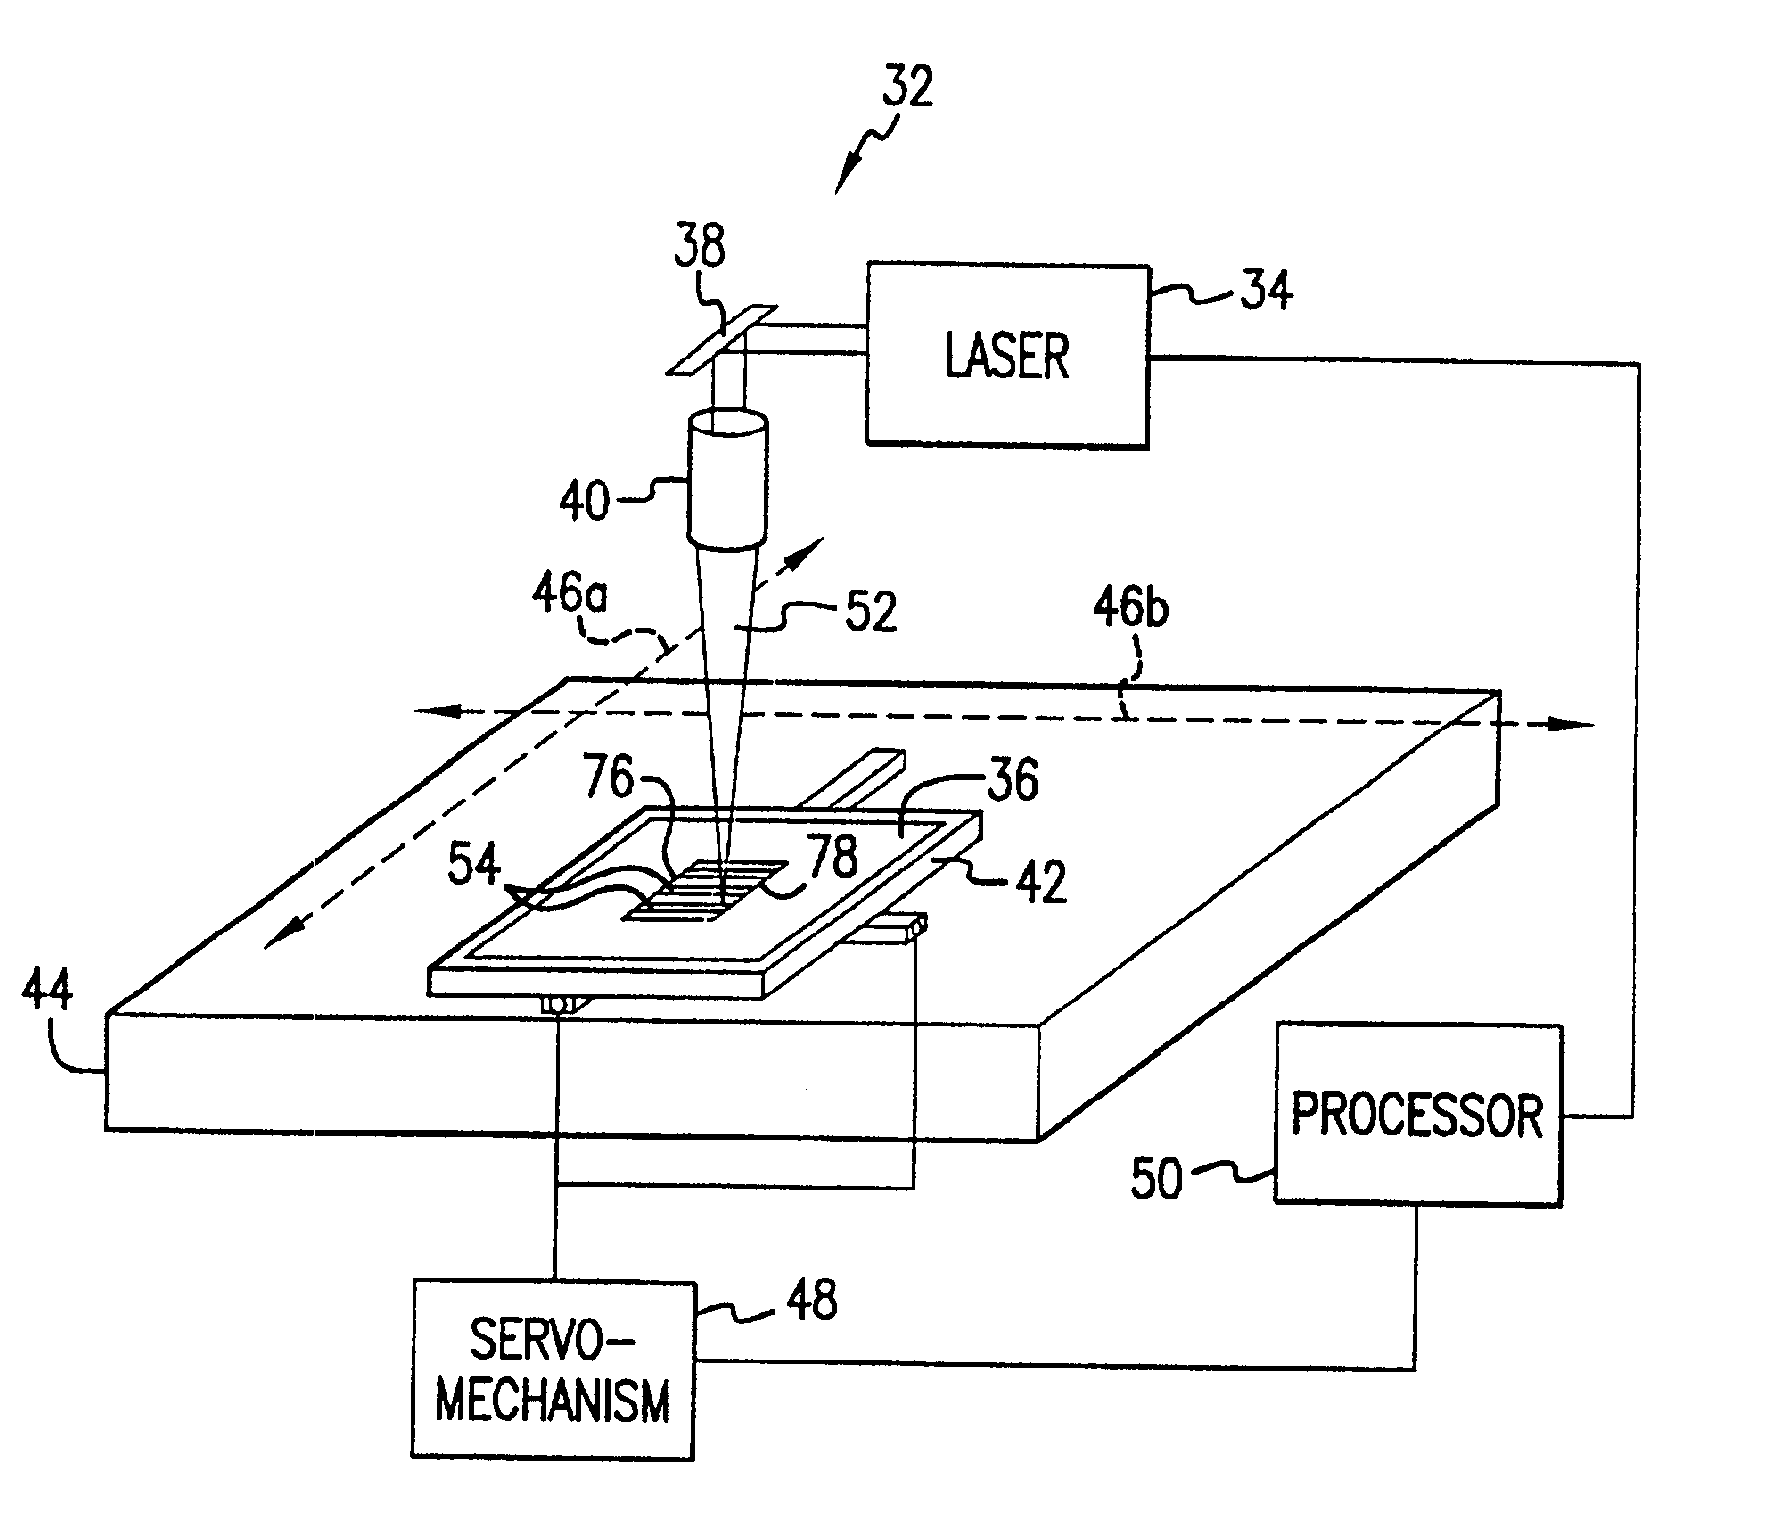 System for thermal shaping of optical fibers